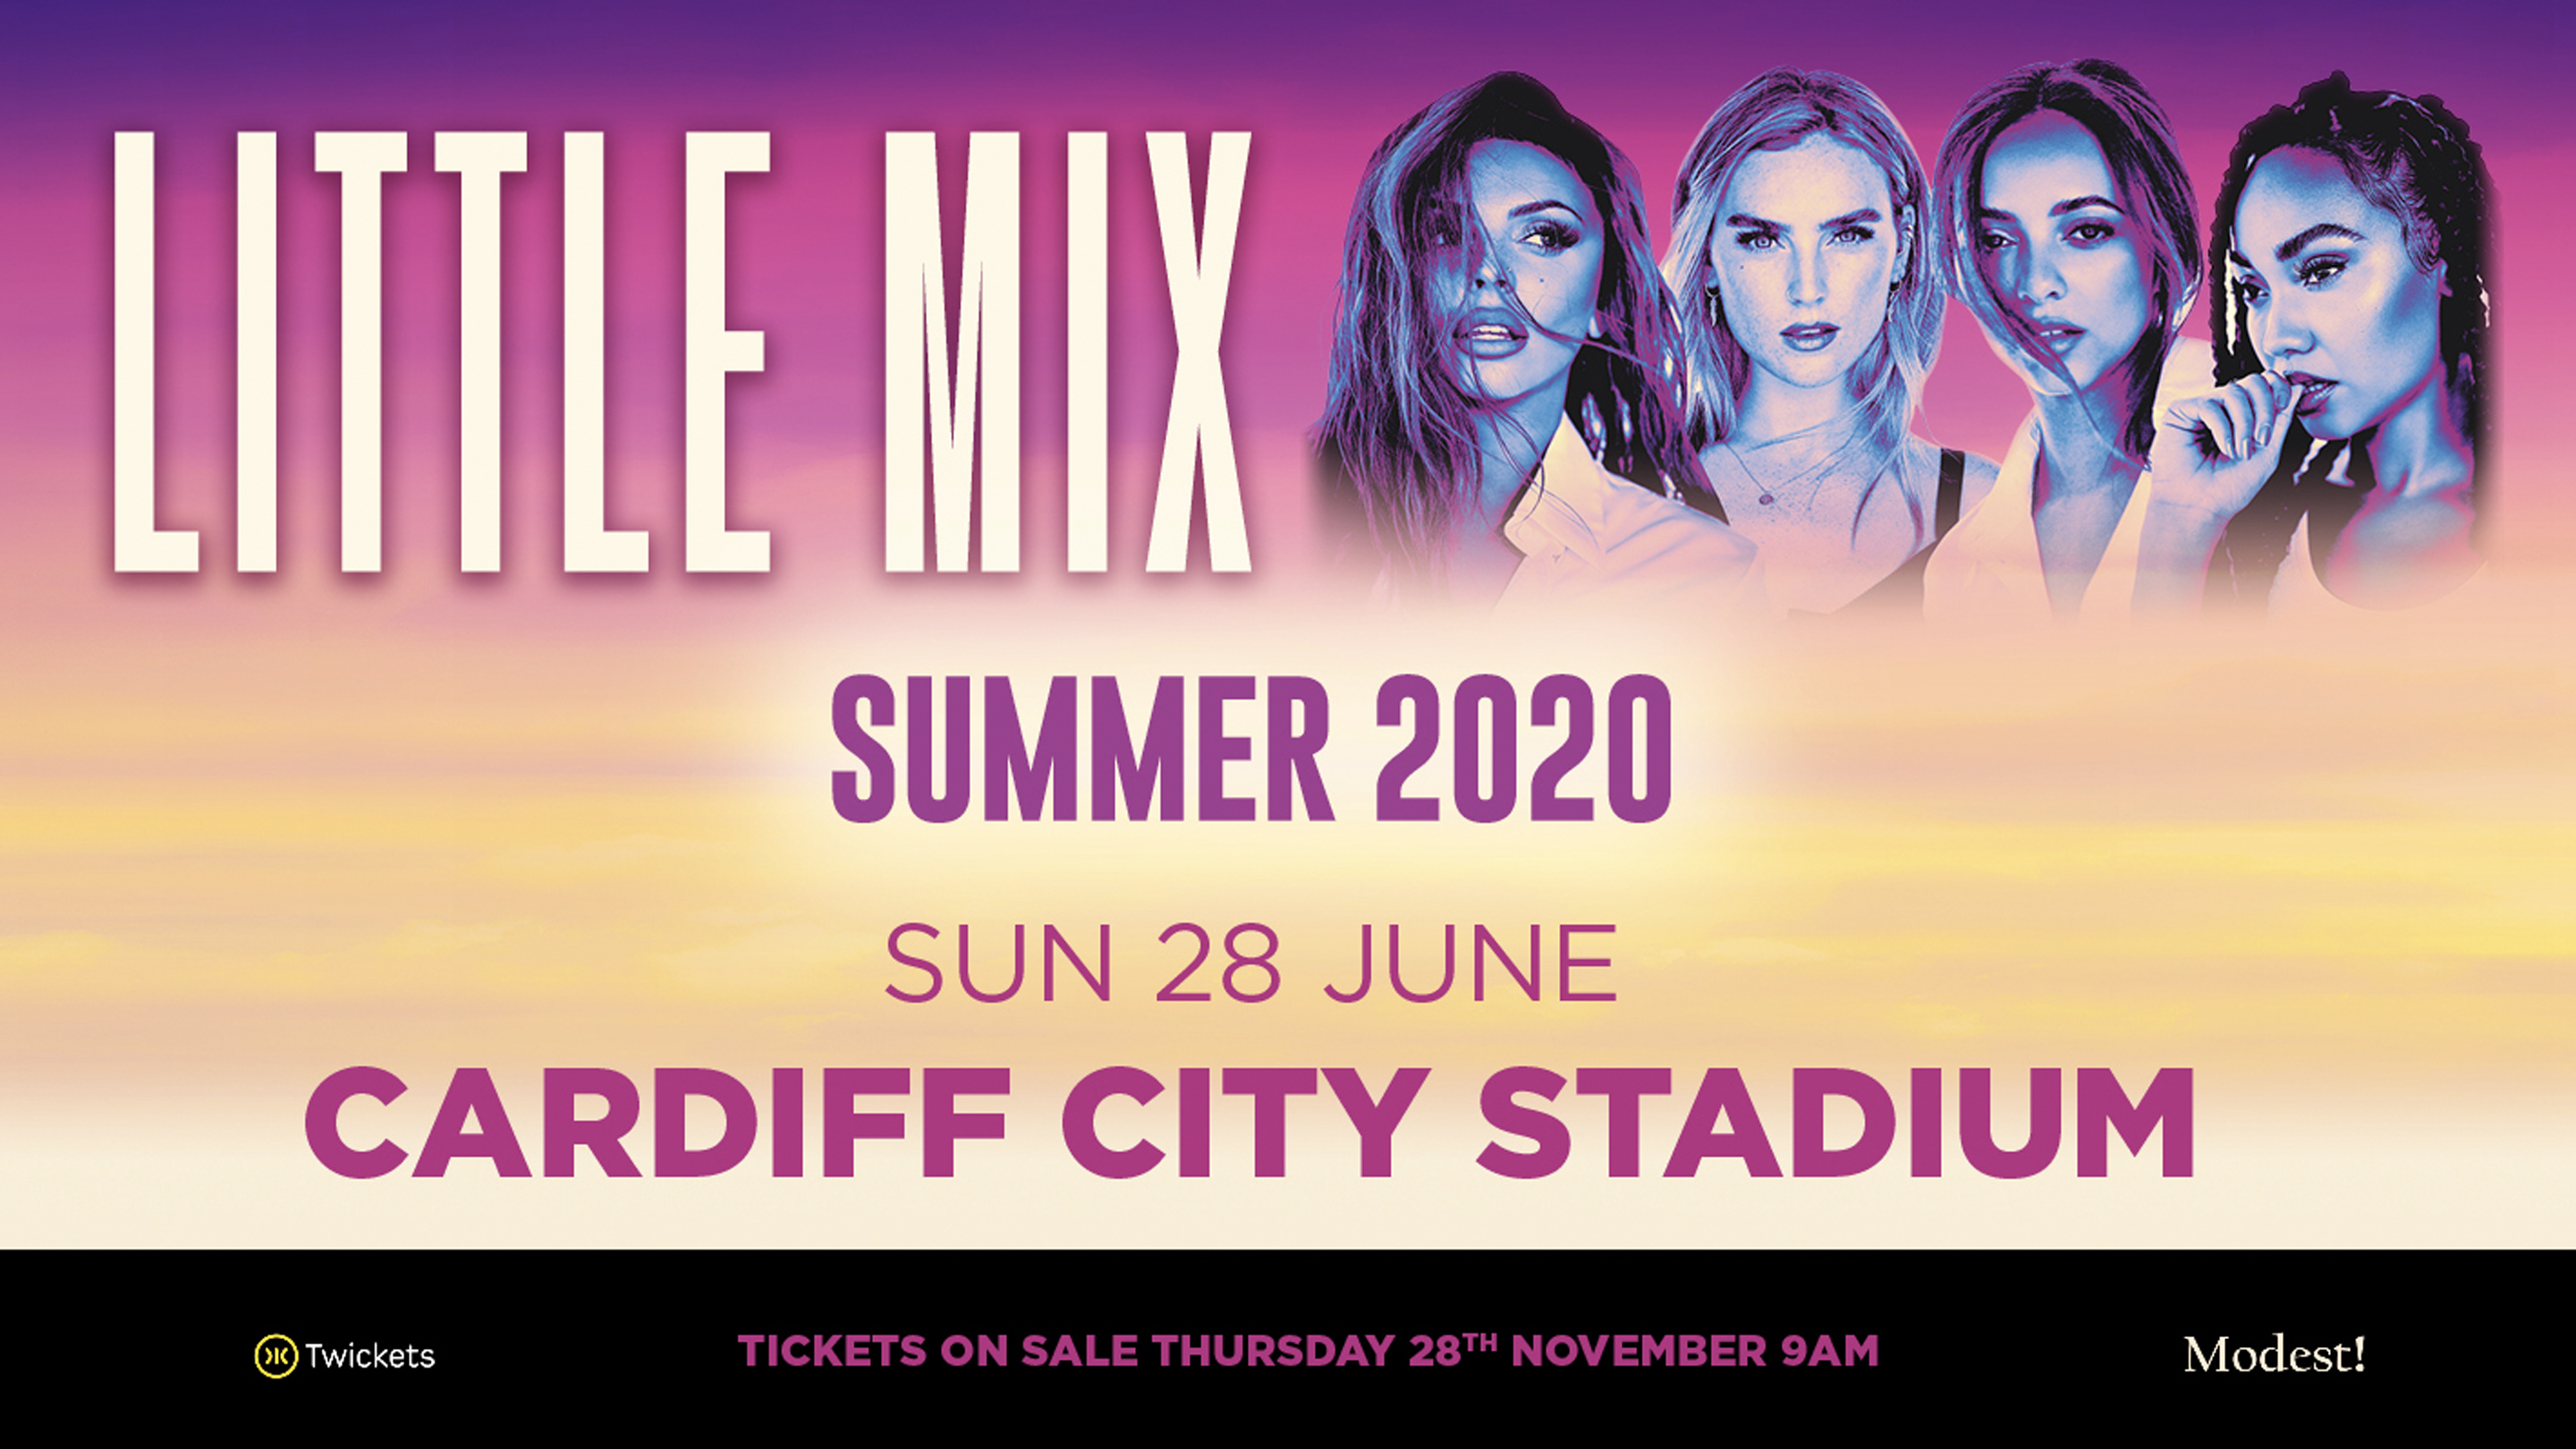 Little Mix are coming to CCS...